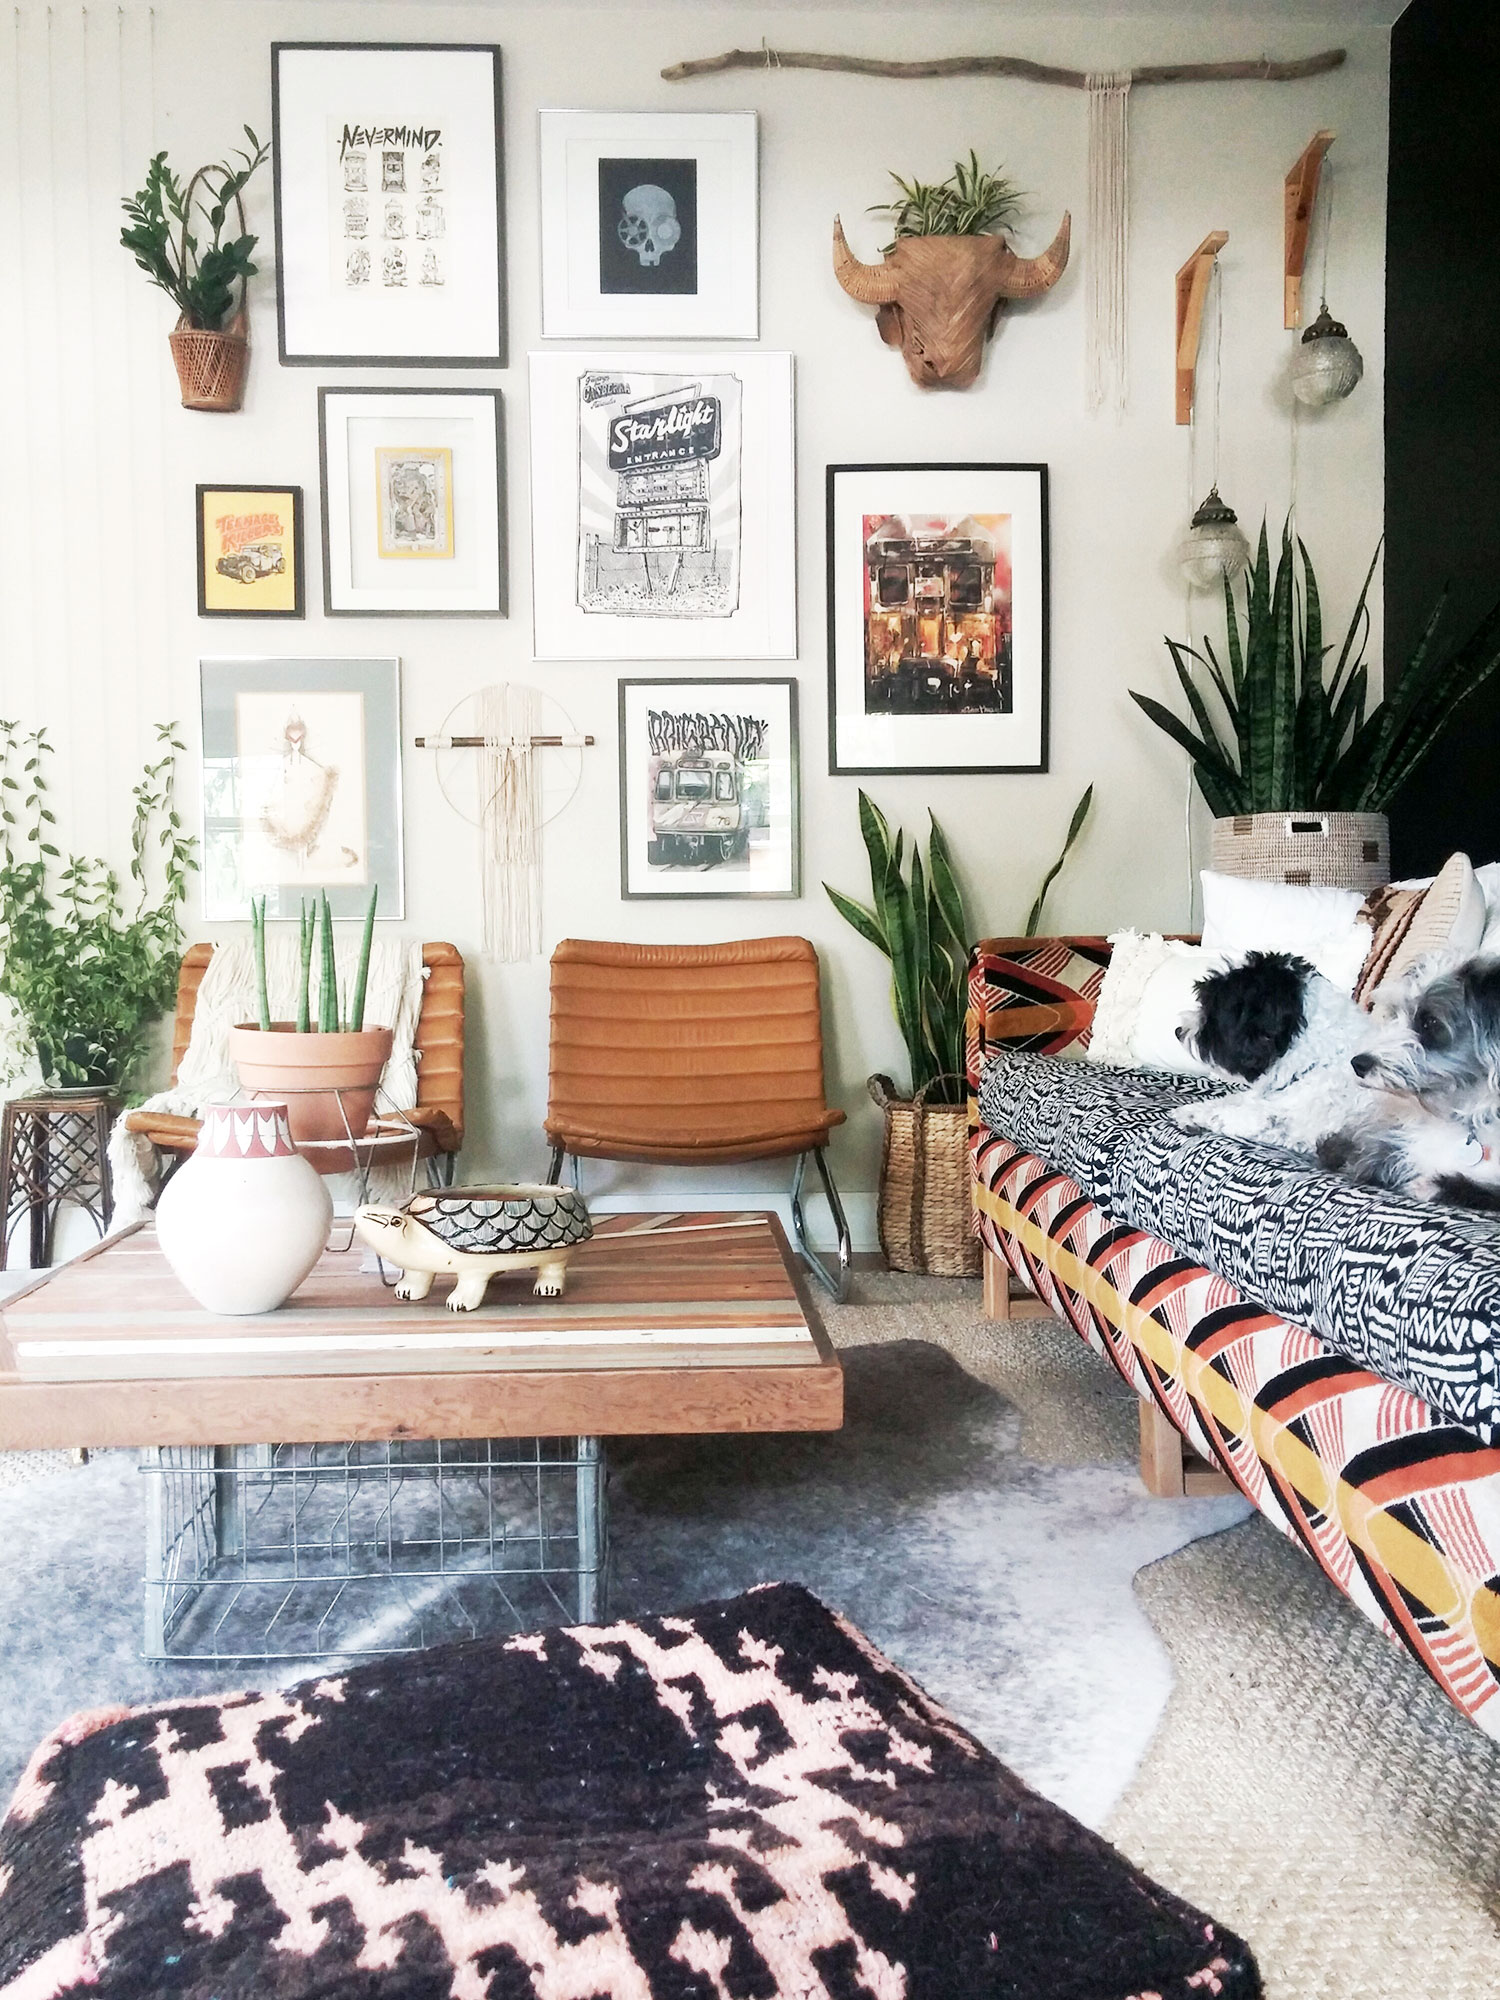 wall living bohemian room boho decor modern rooms southwest inspired spectacular statement decoration inspo walls chic source visit digsdigs cart